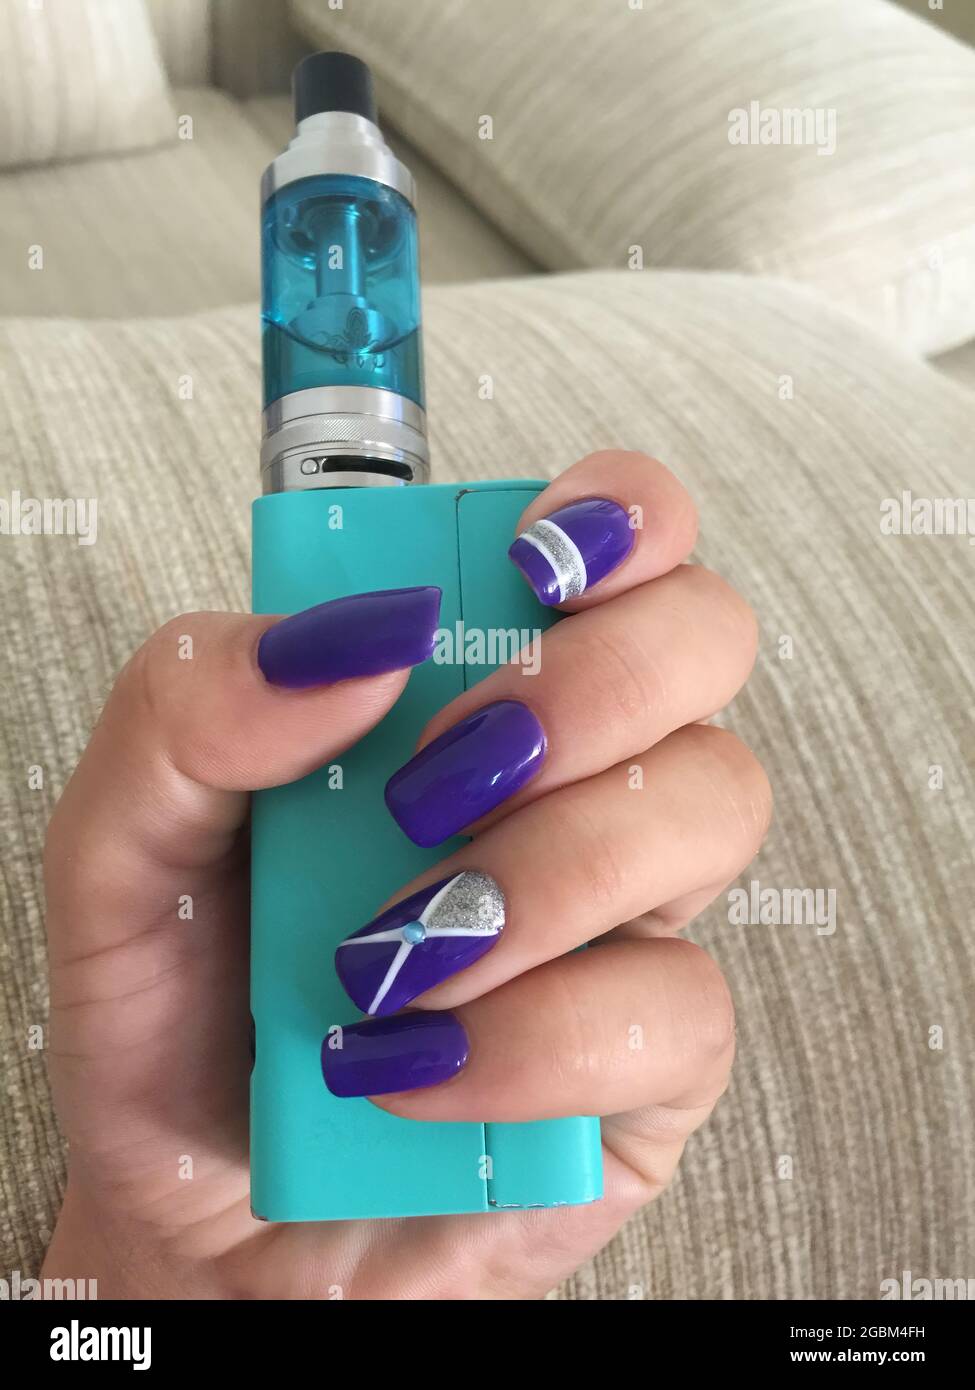 Female hand with gel polish holding VAPE close-up on sofa background. Woman's hands holding electronic cigarette. Nail art on hers nails. Stock Photo